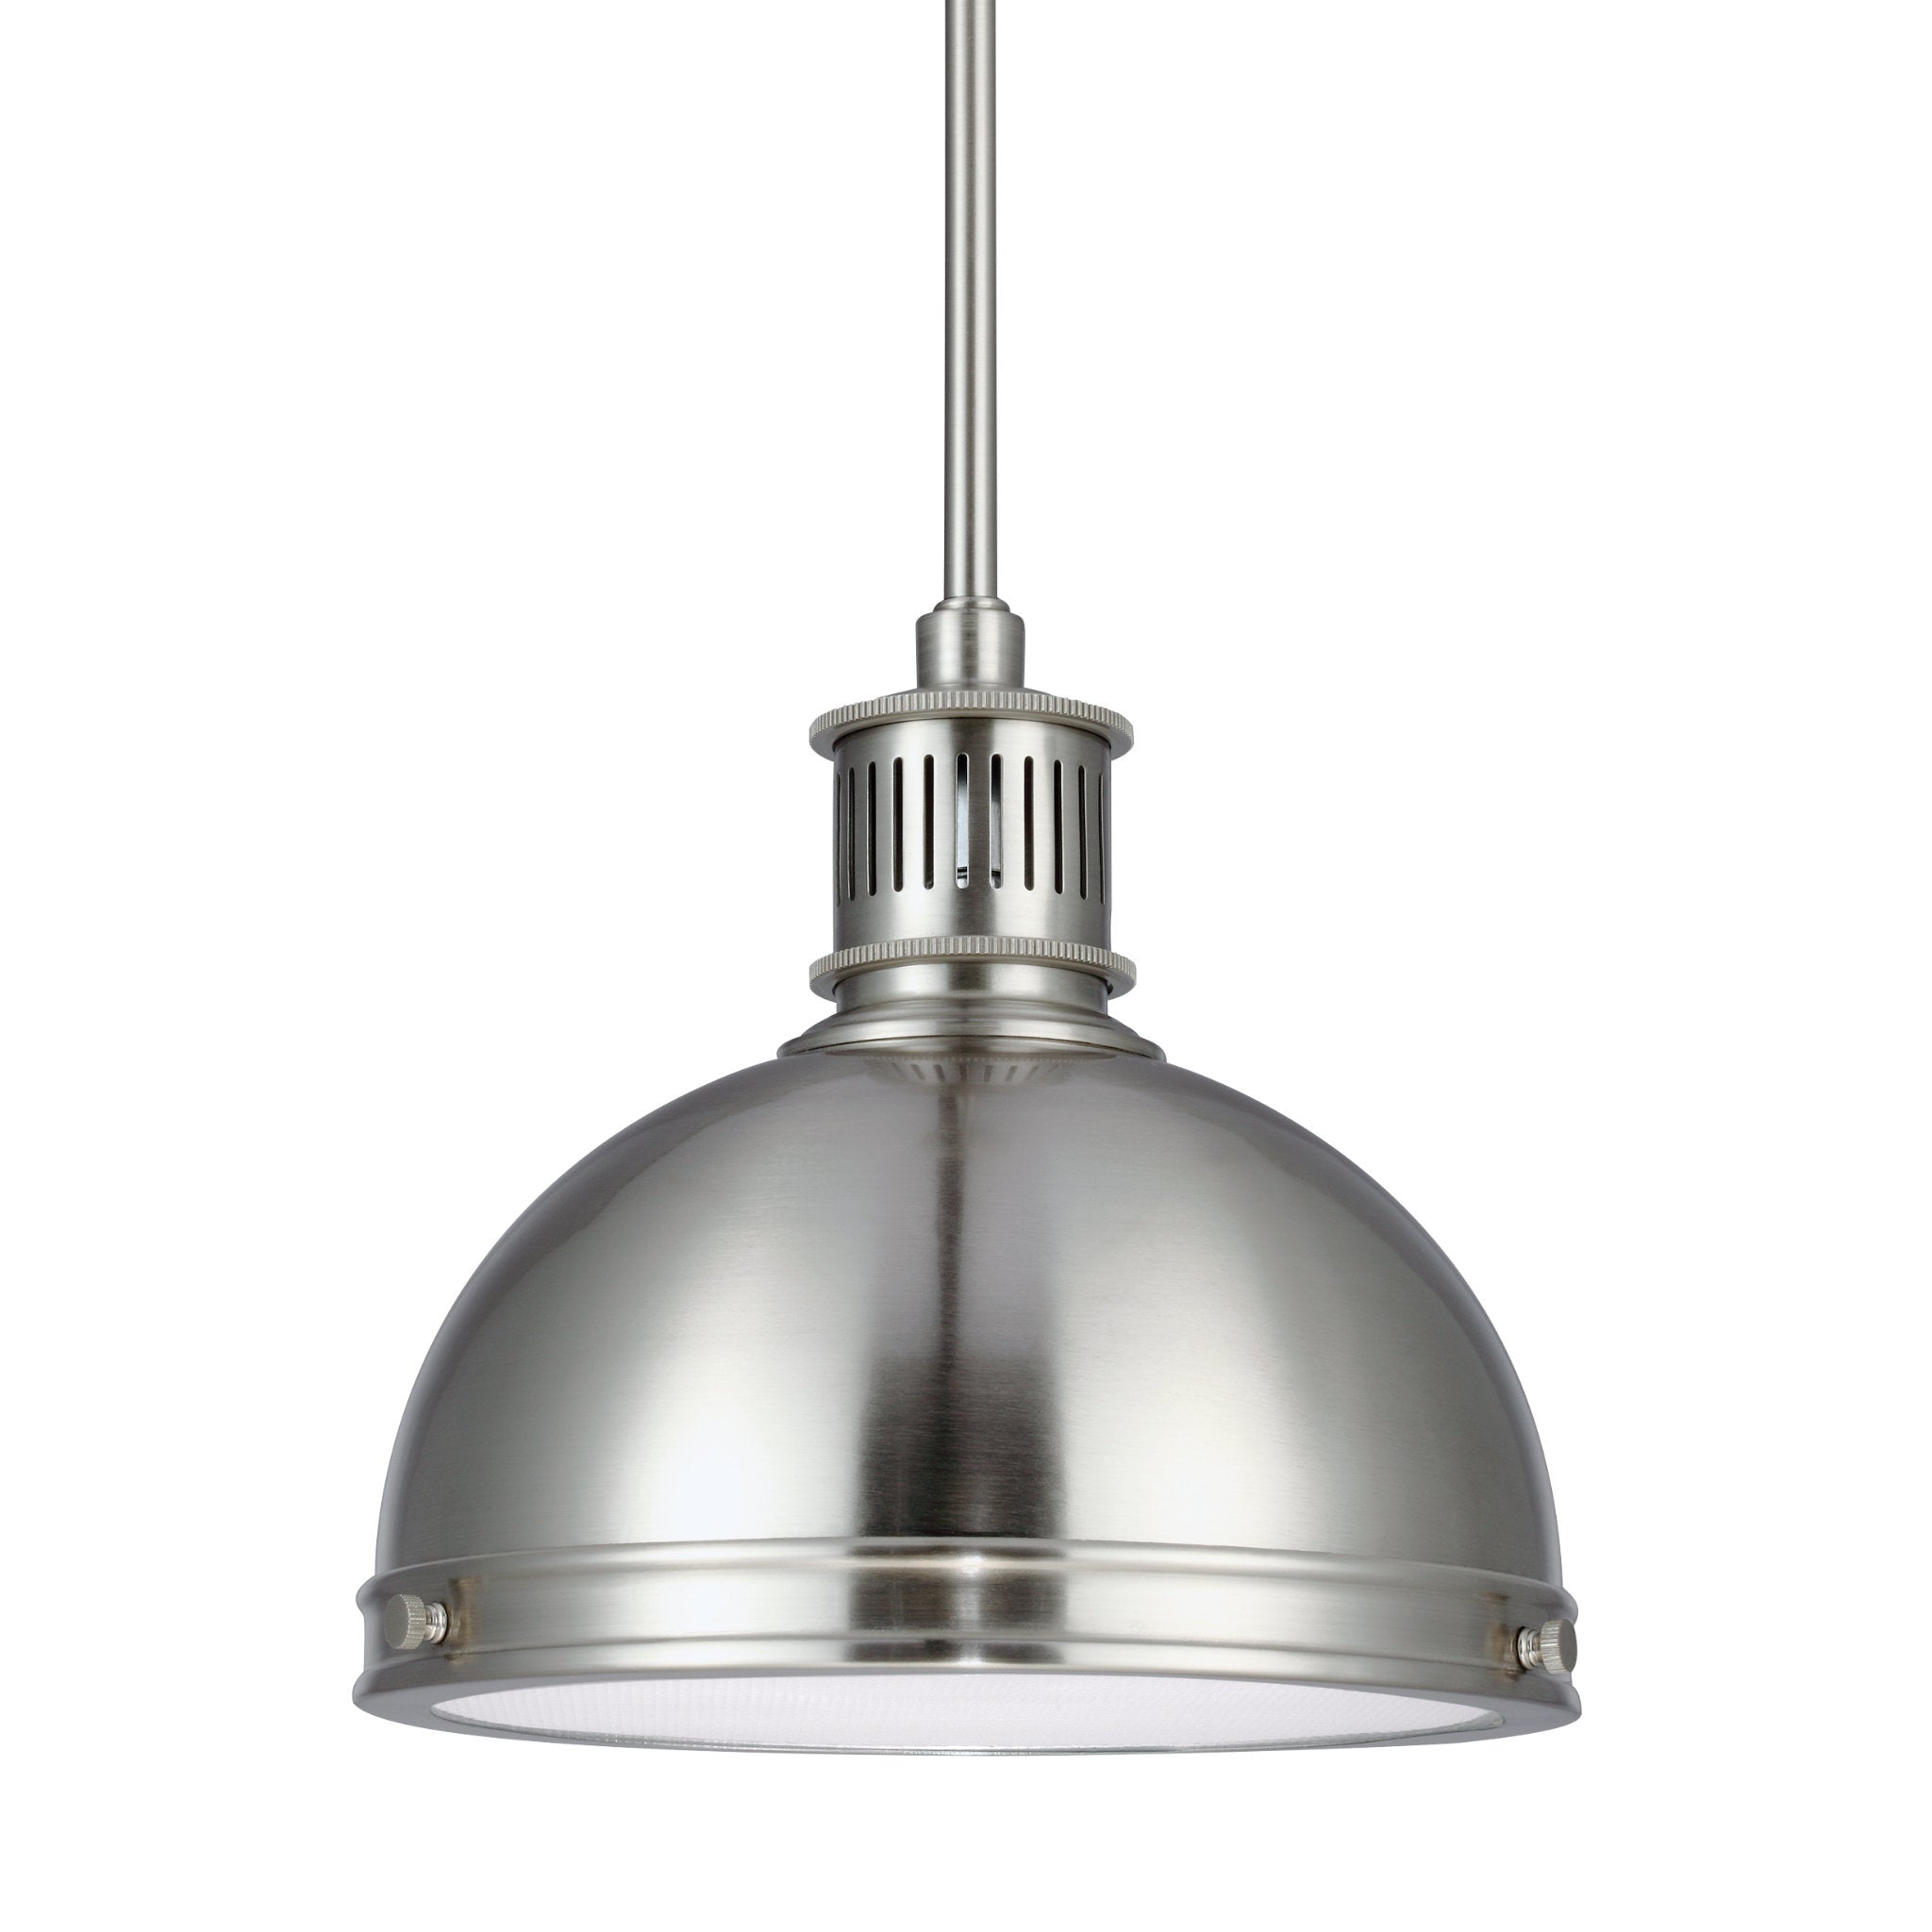 Pratt Street Metal One Light Pendant Contemporary 8.5" Height Steel Round Clear Textured Shade in Brushed Nickel